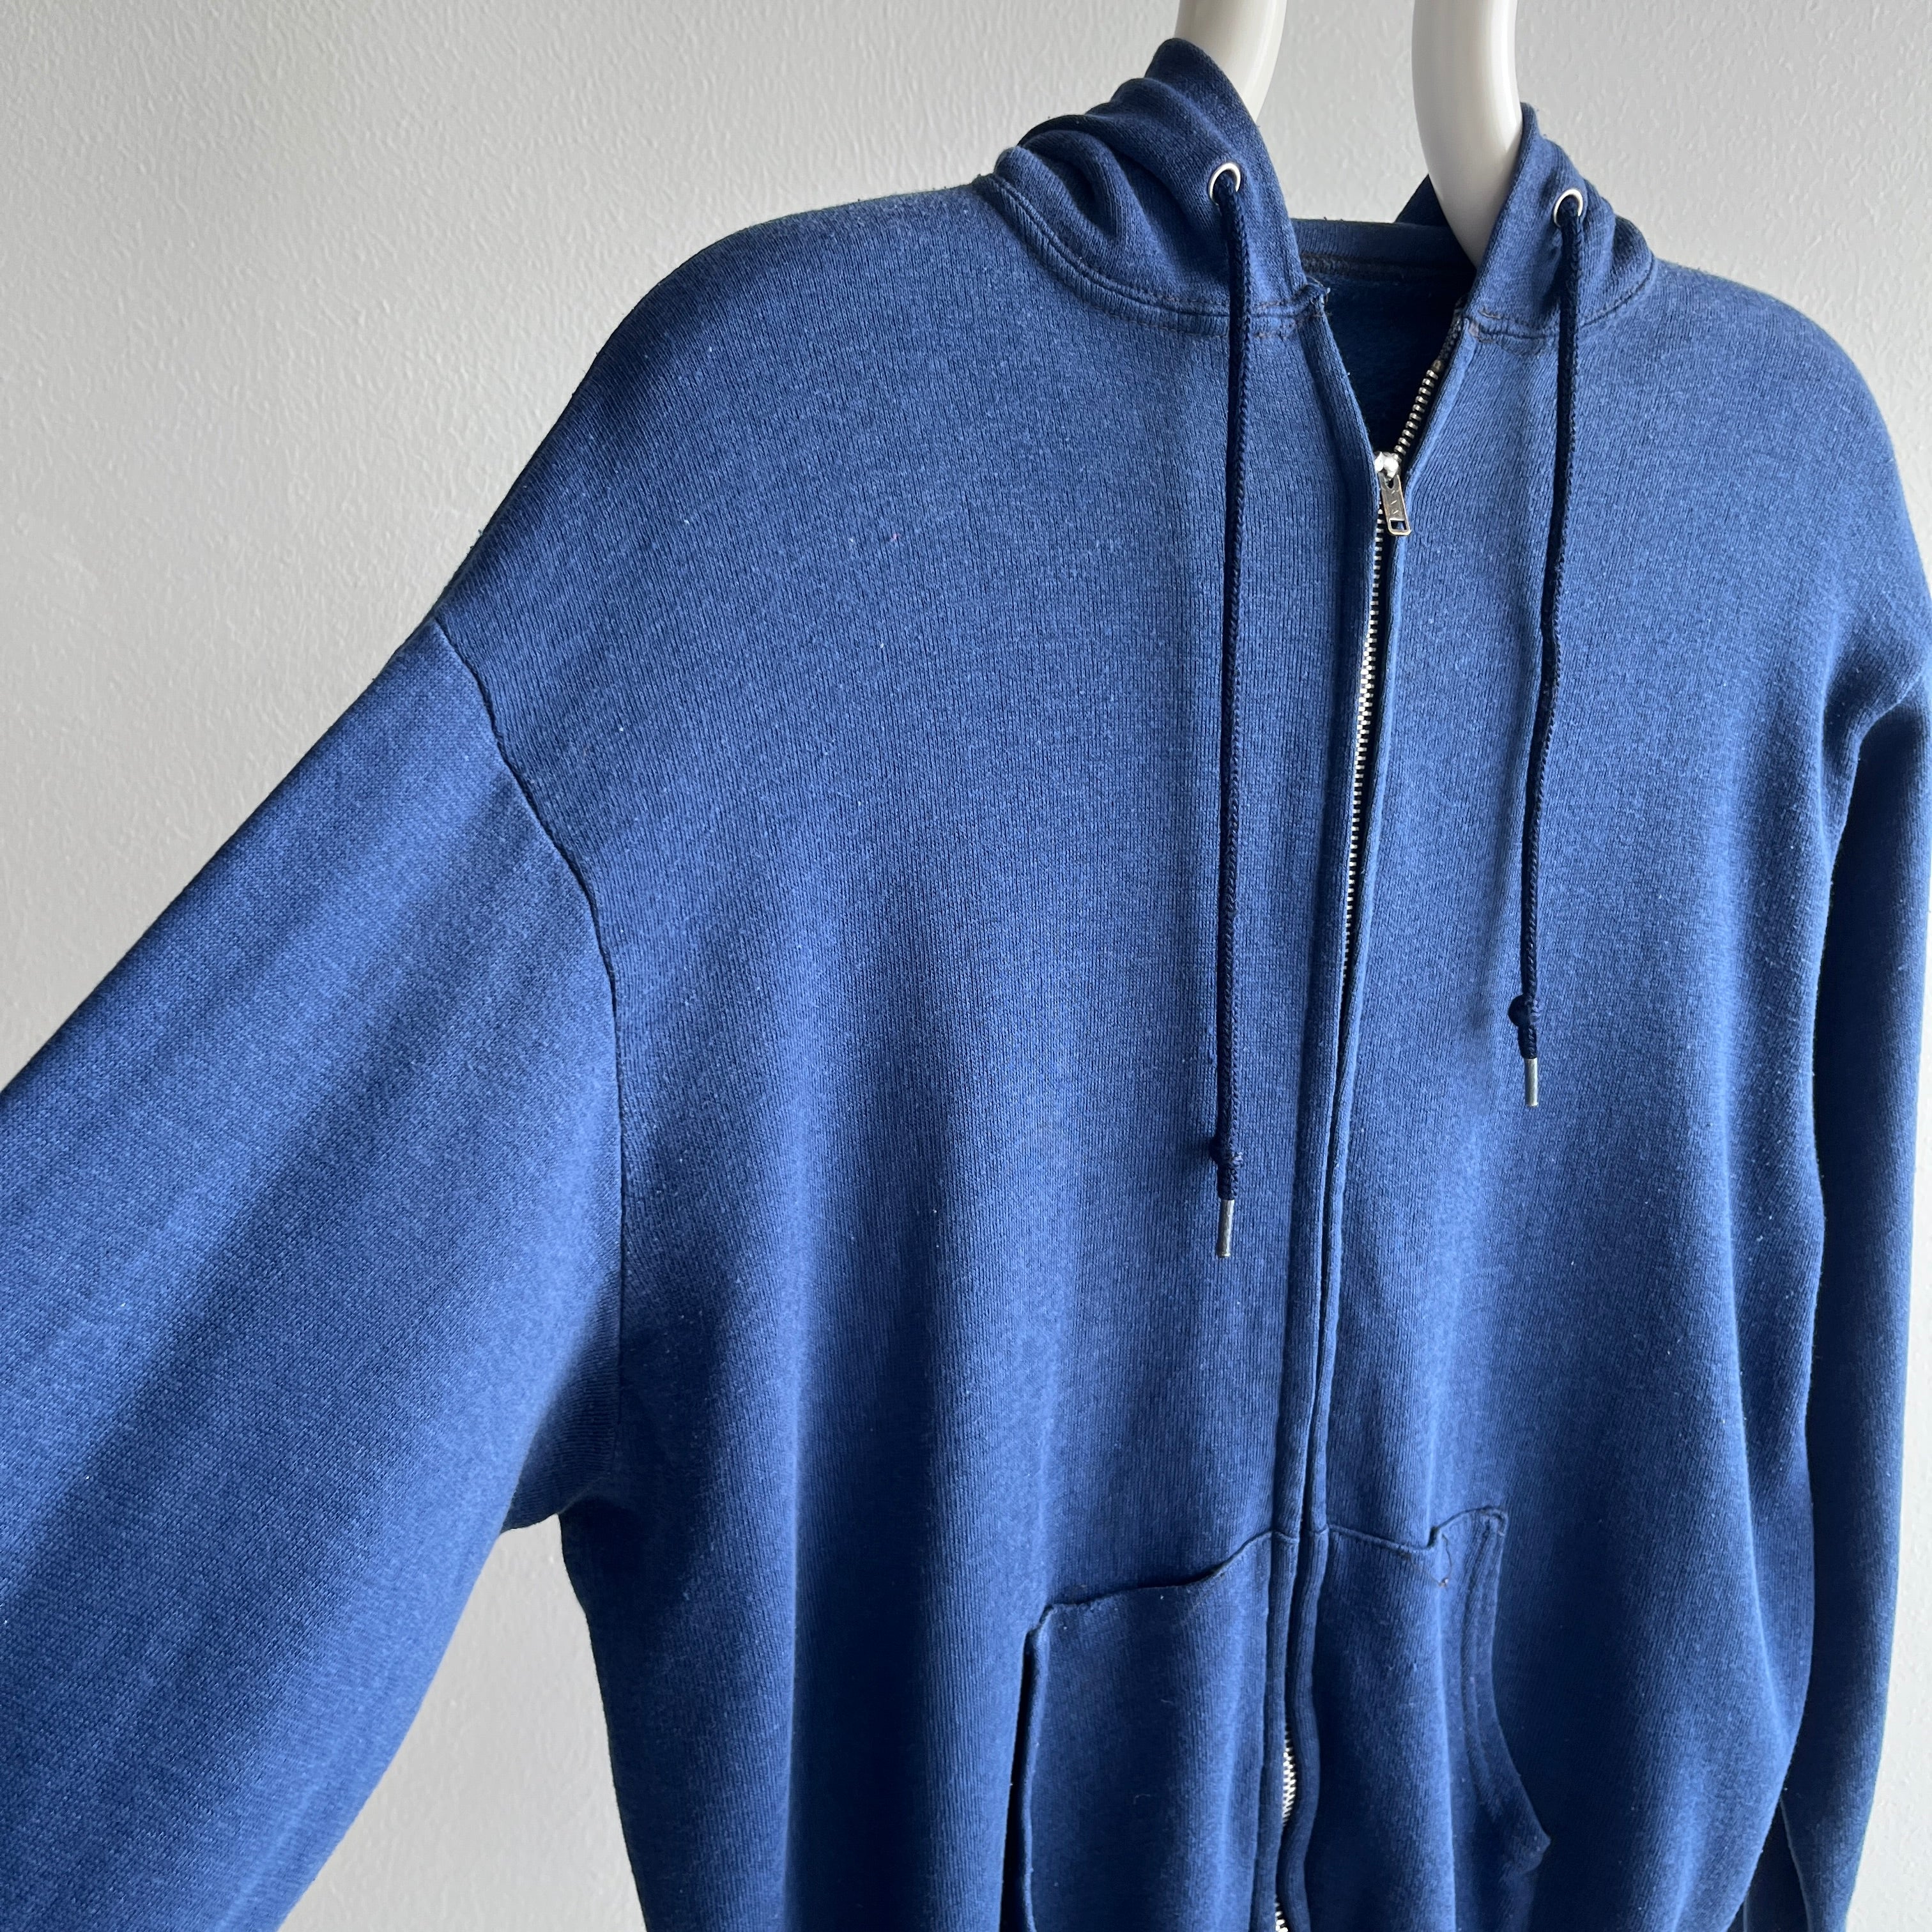 1970/80s Soft and Slouchy Beat Up Faded Navy Zip Up Hoodie Sweatshirt